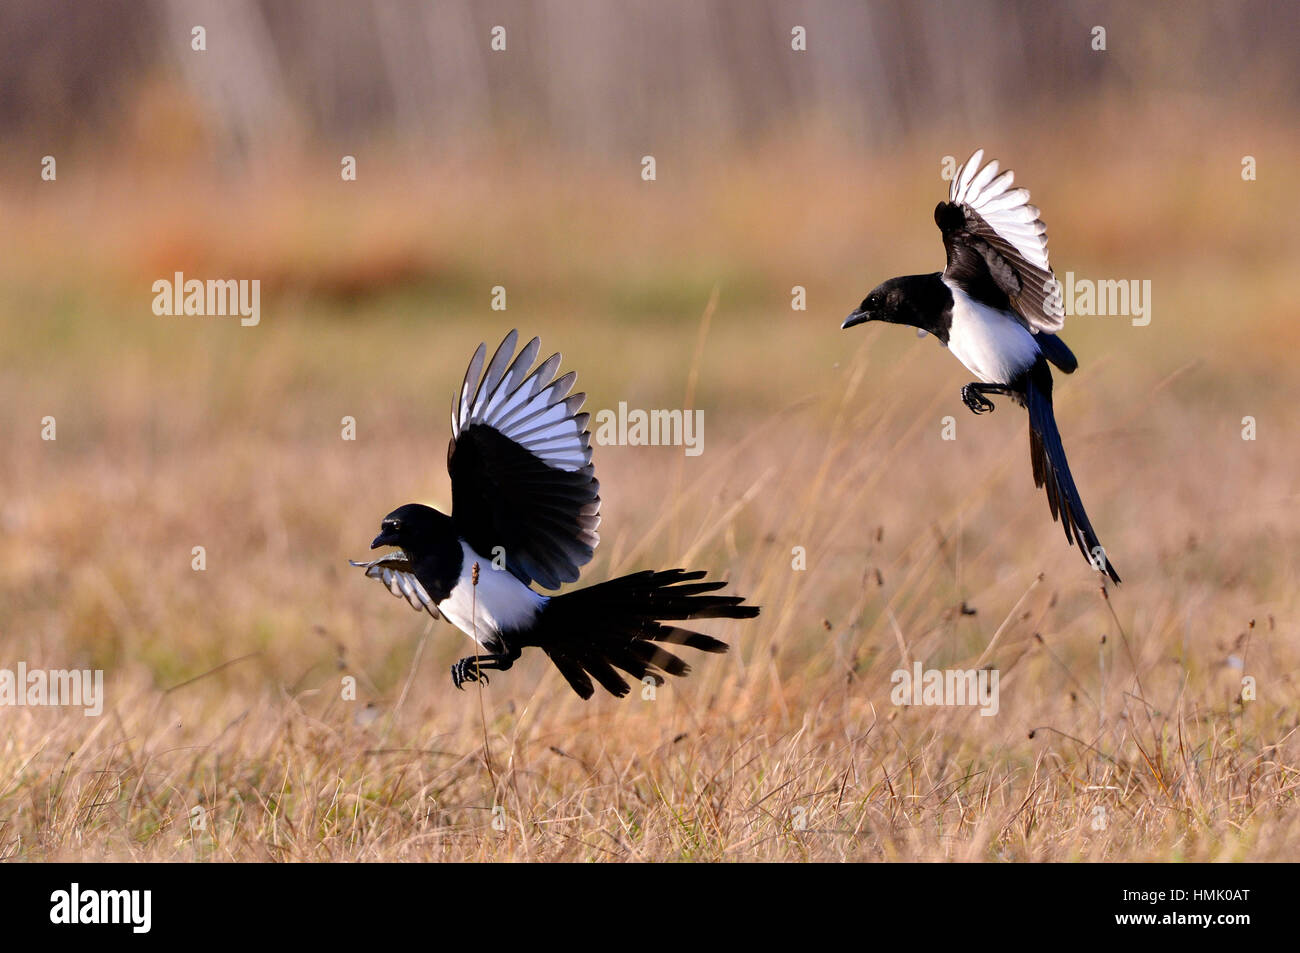 Magpies (Pica pica), two birds in flight, Poland Stock Photo